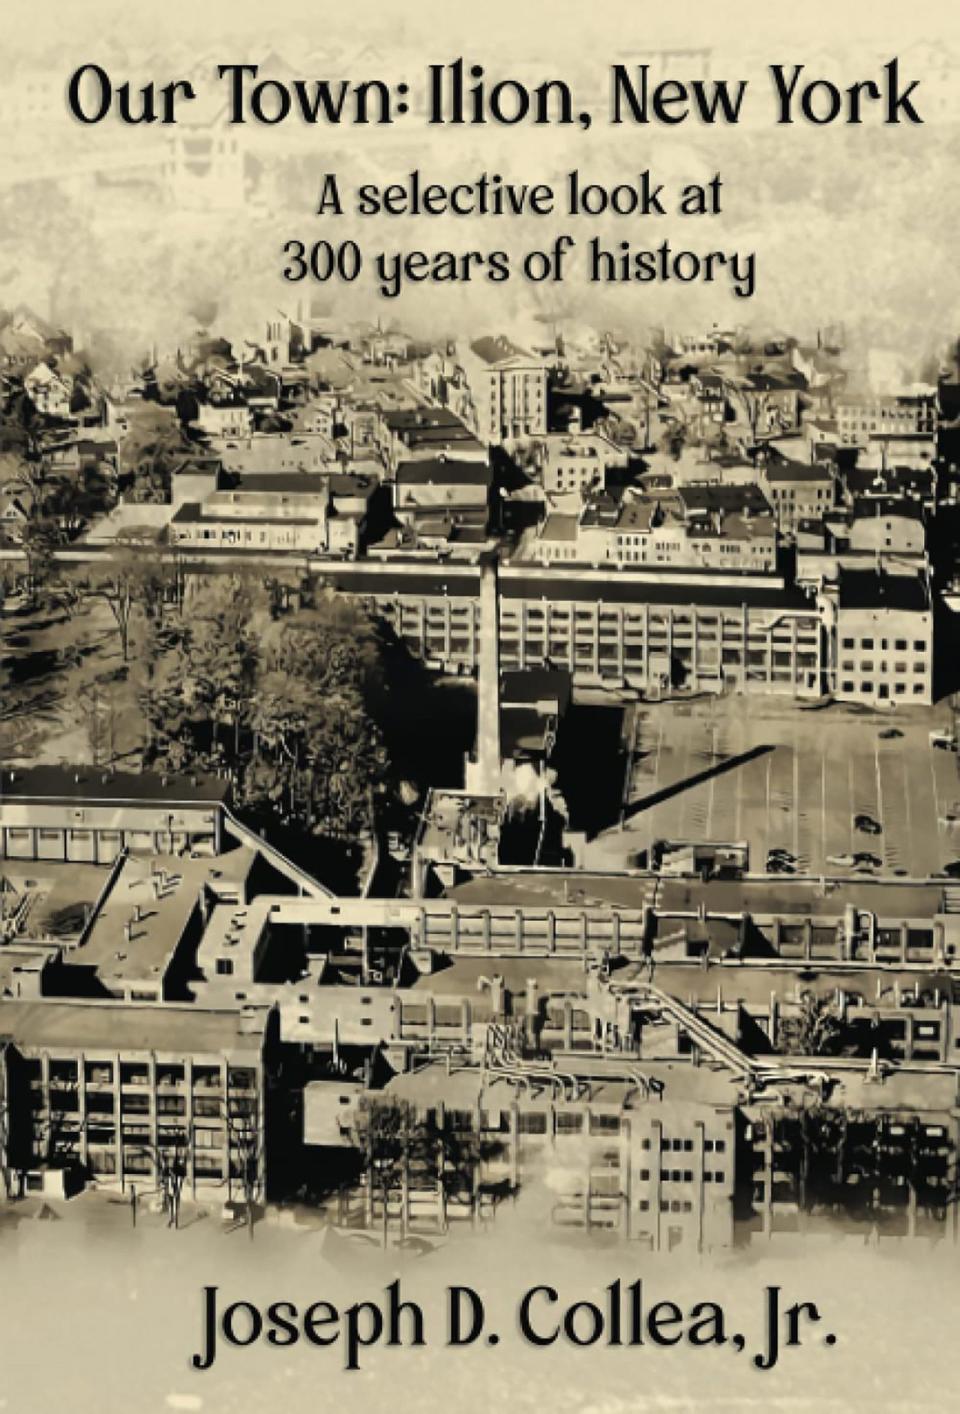 Joseph Collea Jr.'s book 'Our Town - Ilion, New York: A Selective Look at 300 Years of History' was released Jan. 3. It is available now exclusively on Amazon.